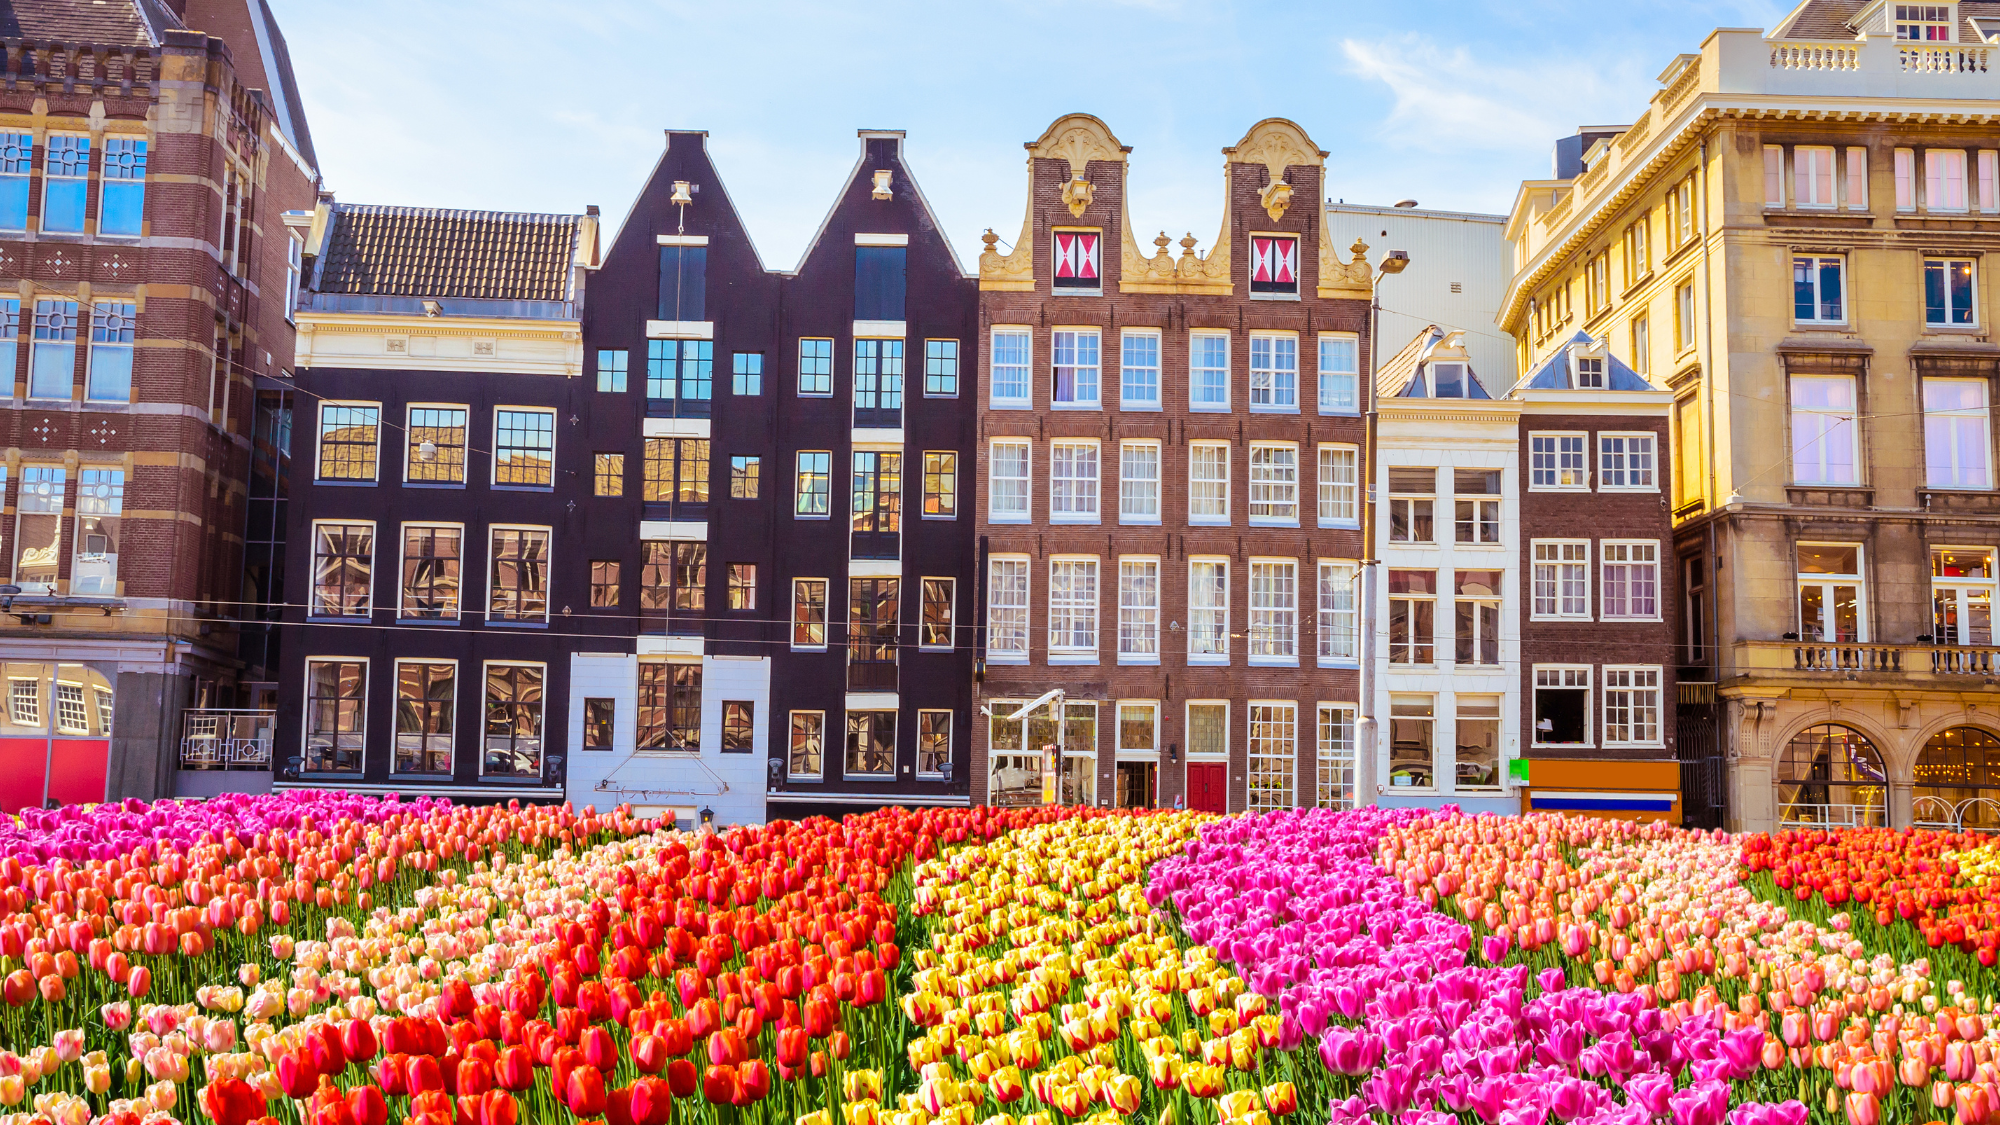 Rows of pink, orange, and yellow flowers in front of historic European buildings.